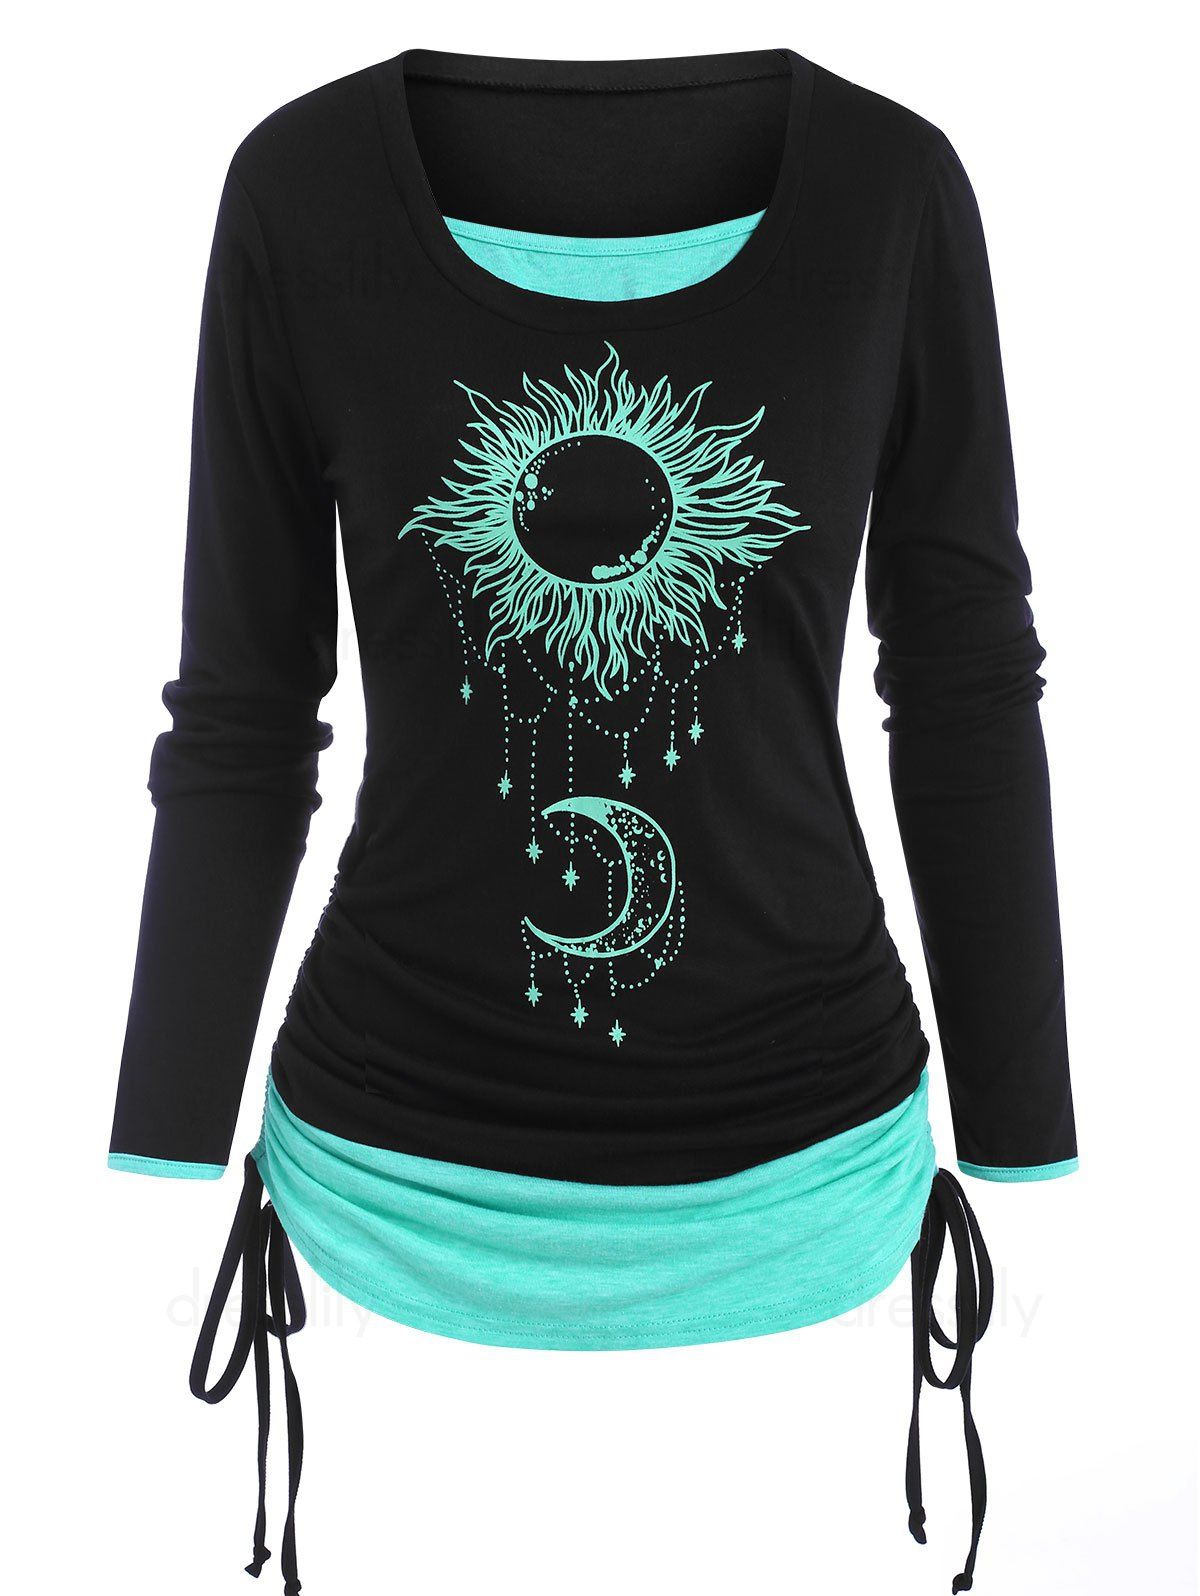 Sun Moon Print Cinched Ruched Long Sleeves 2 in 1 T Shirt - BLACK M